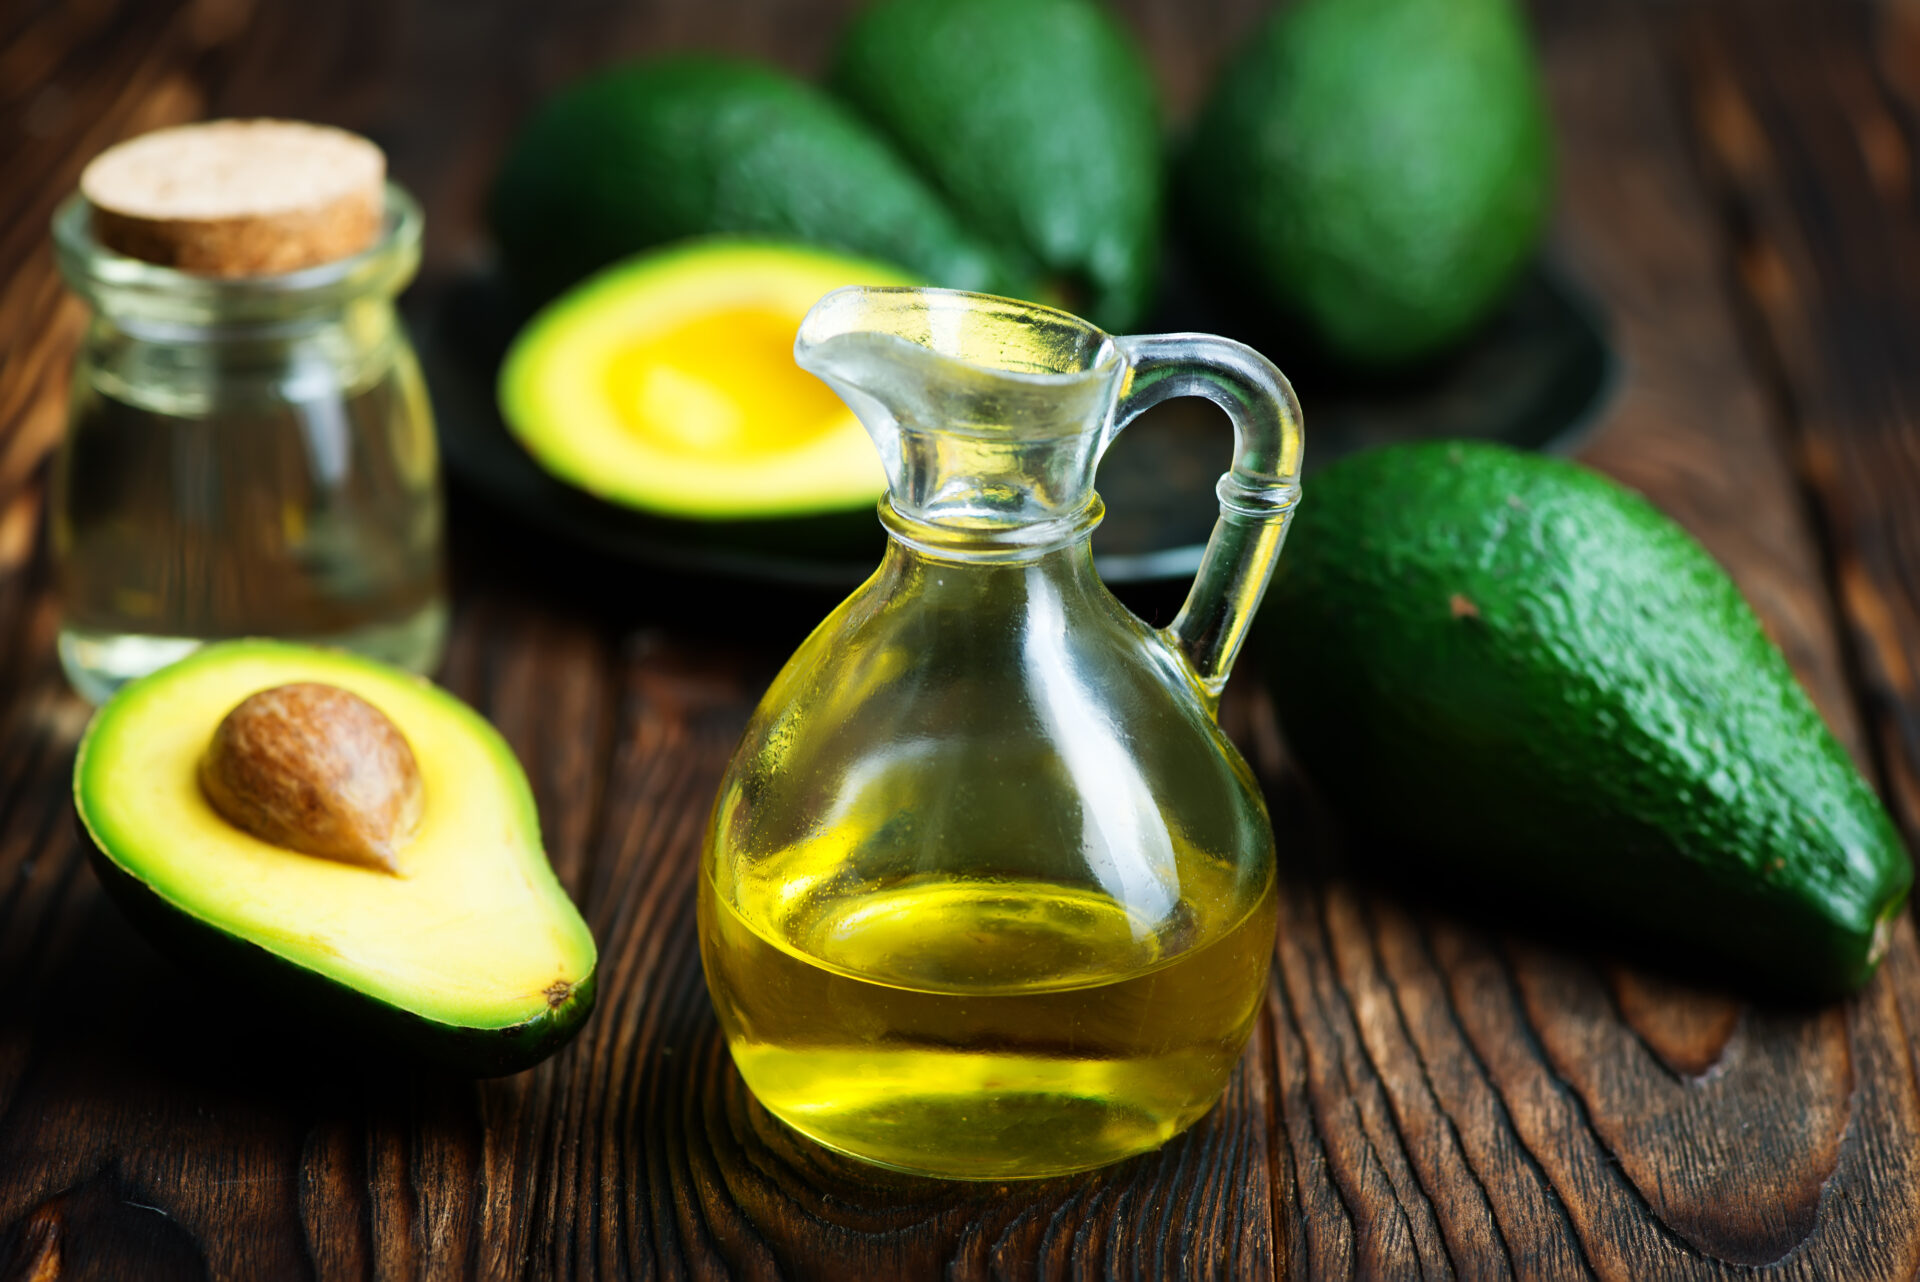 Avocado Oil: What is it, and How Do I Use it?